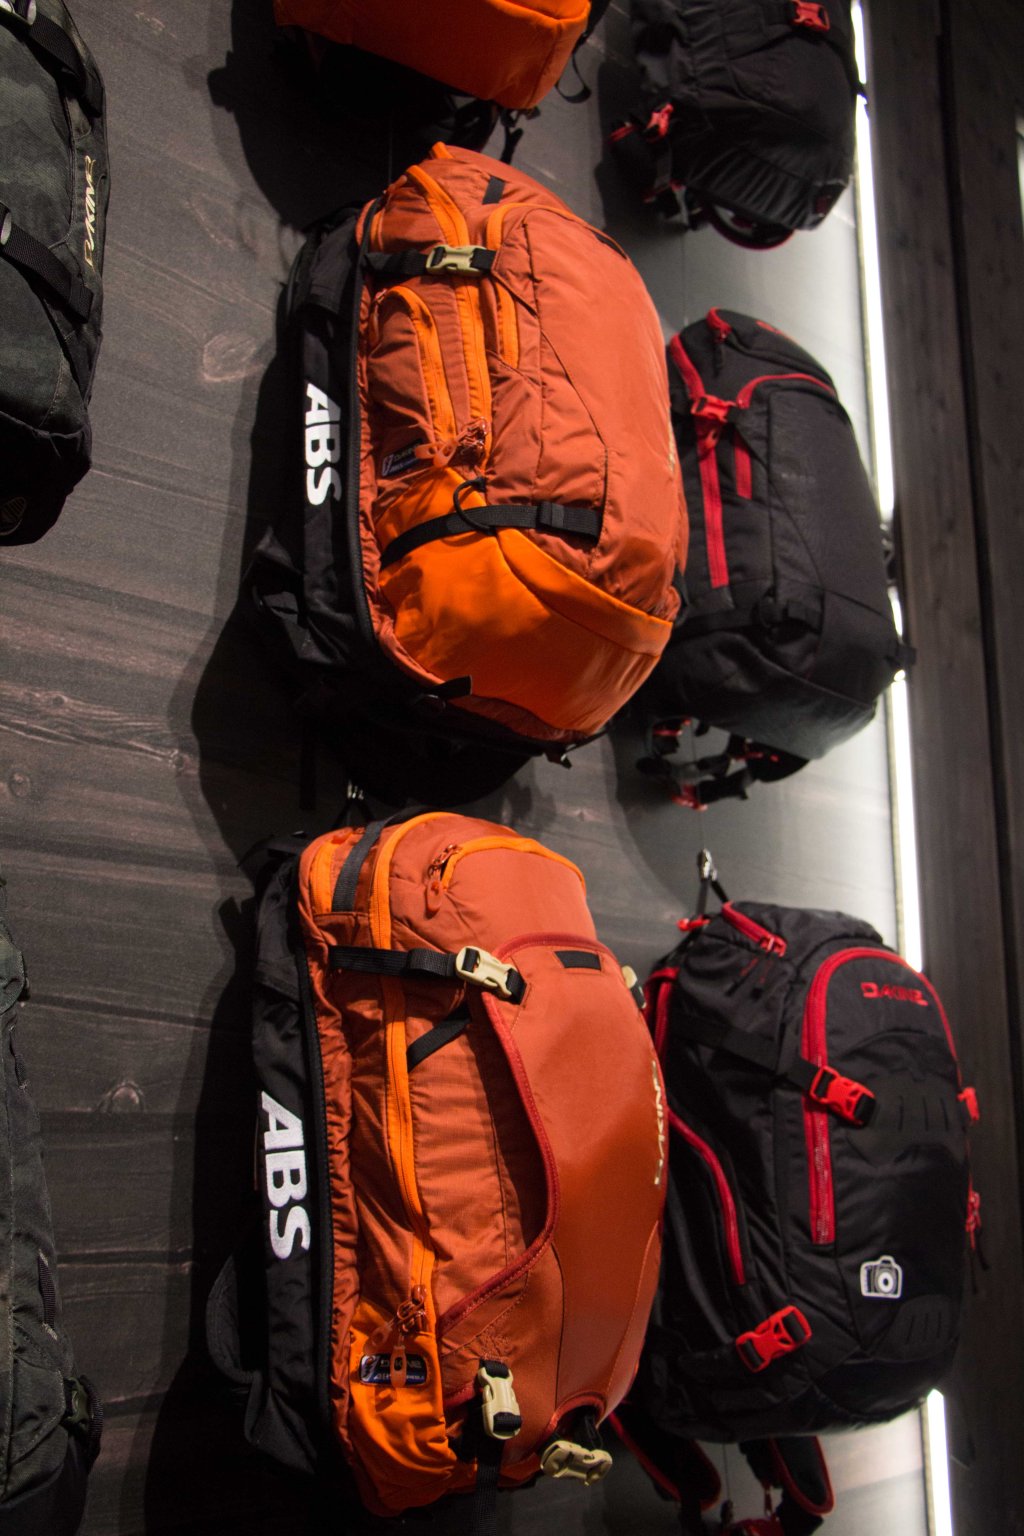 Dakine is also there: Dakine airbag backpack with ABS technology